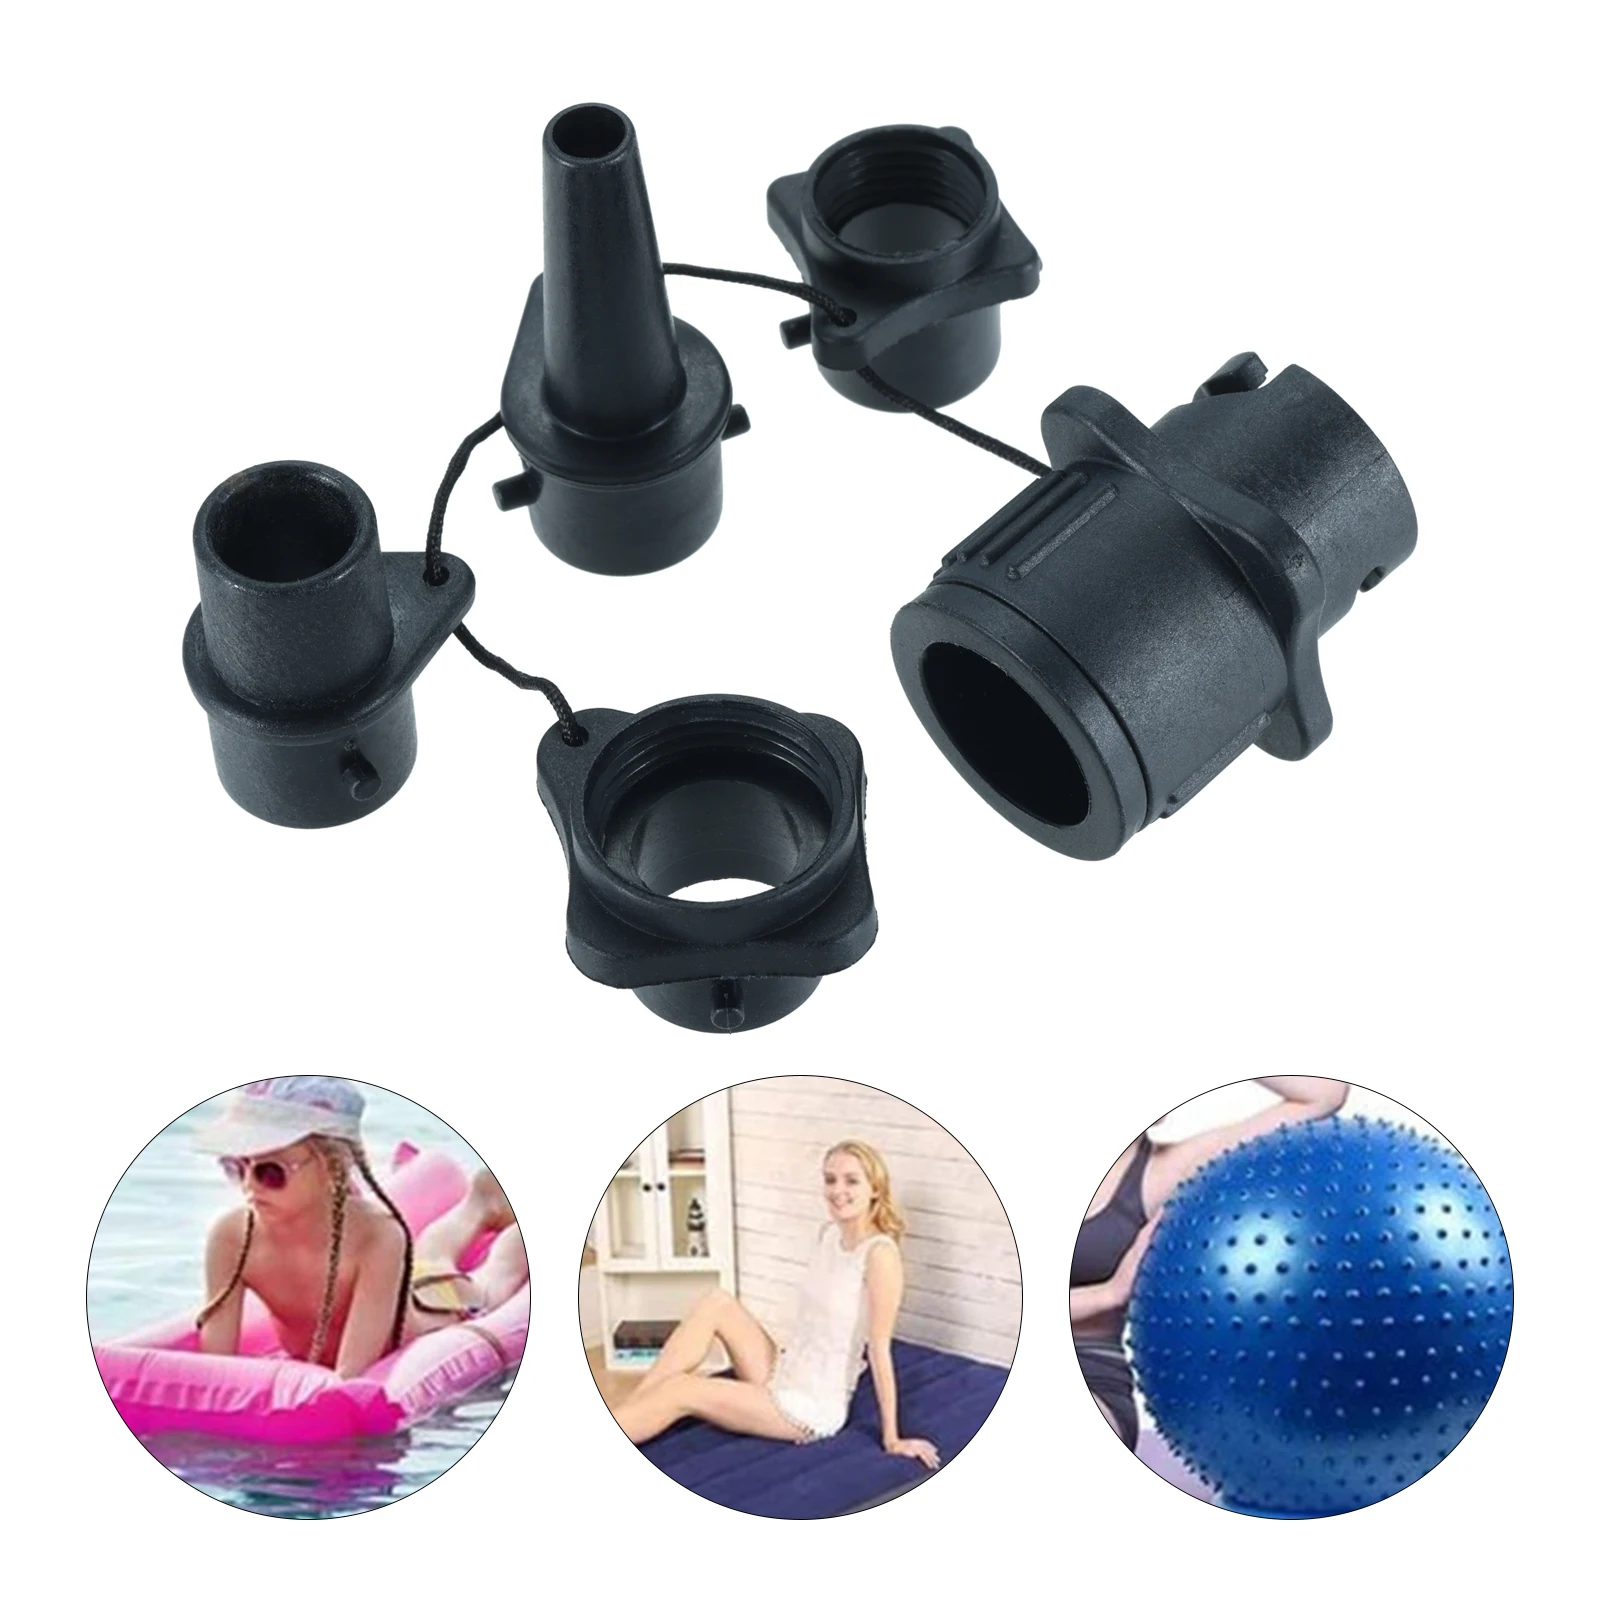 1 Set Air Valve Nozzle Adapter Kit Black Plastic Multi-Function Hose Connector Surf Paddle Board Canoe Inflatable Boat Accessory faster leveling possible anysub vyper touch adapter board 3d printer accessory p9jb